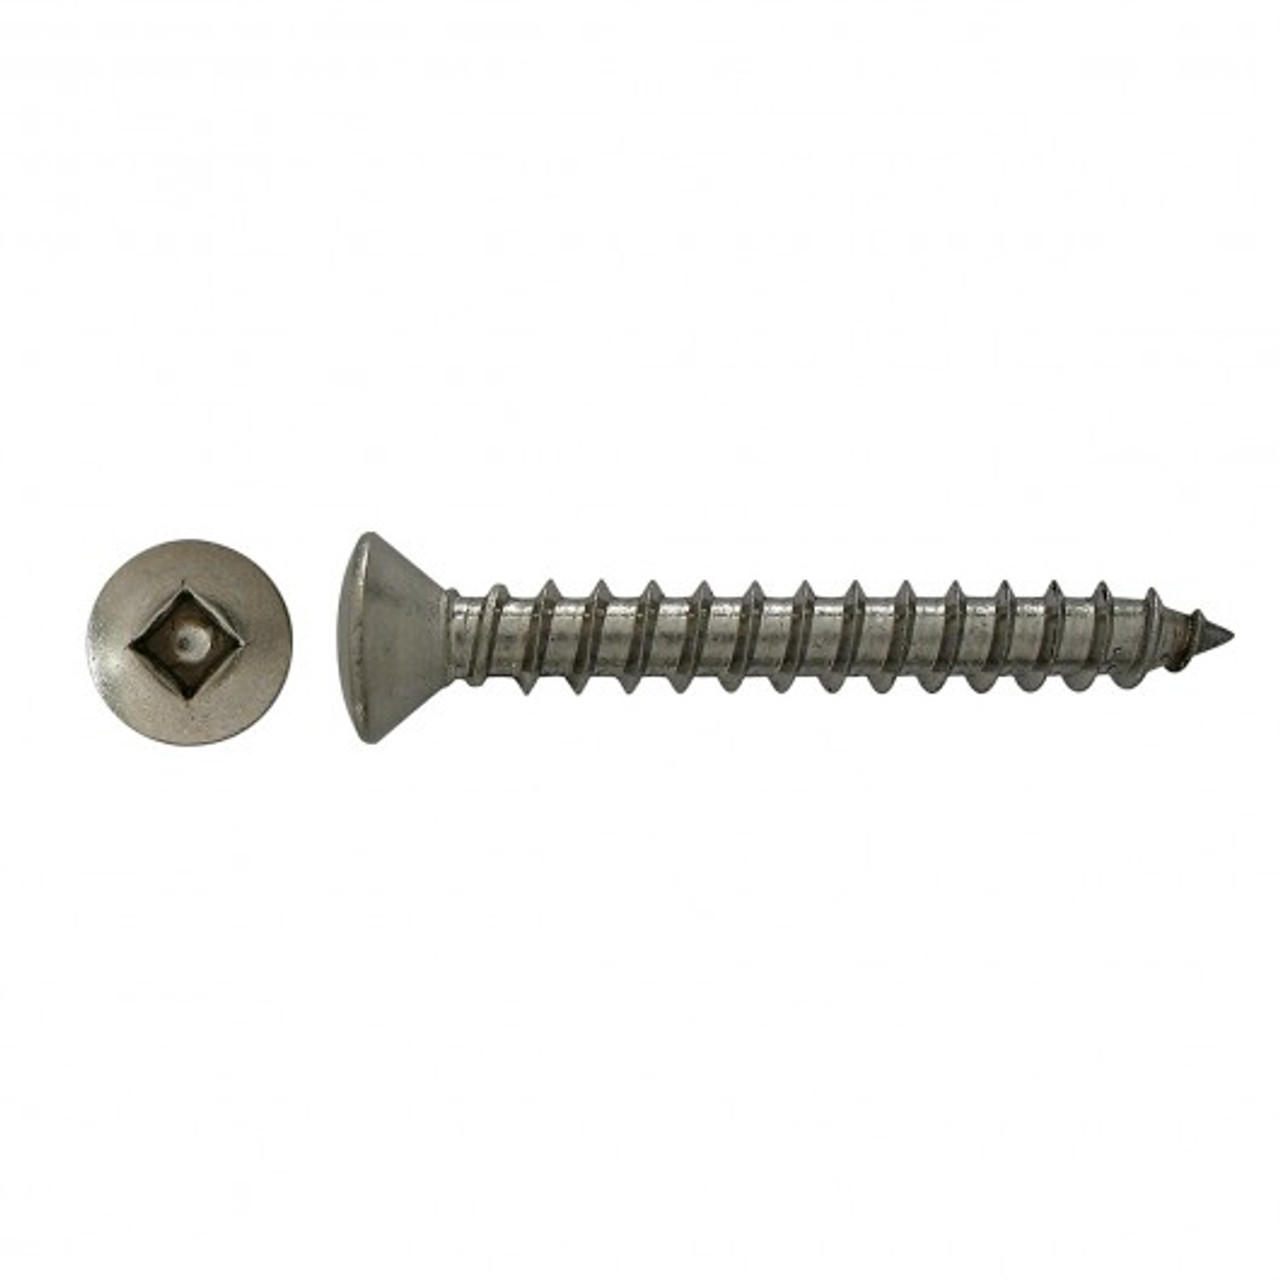 #8 x 3/4" Oval Head Stainless Steel Tapping Screw 100 Pc.   5165-139